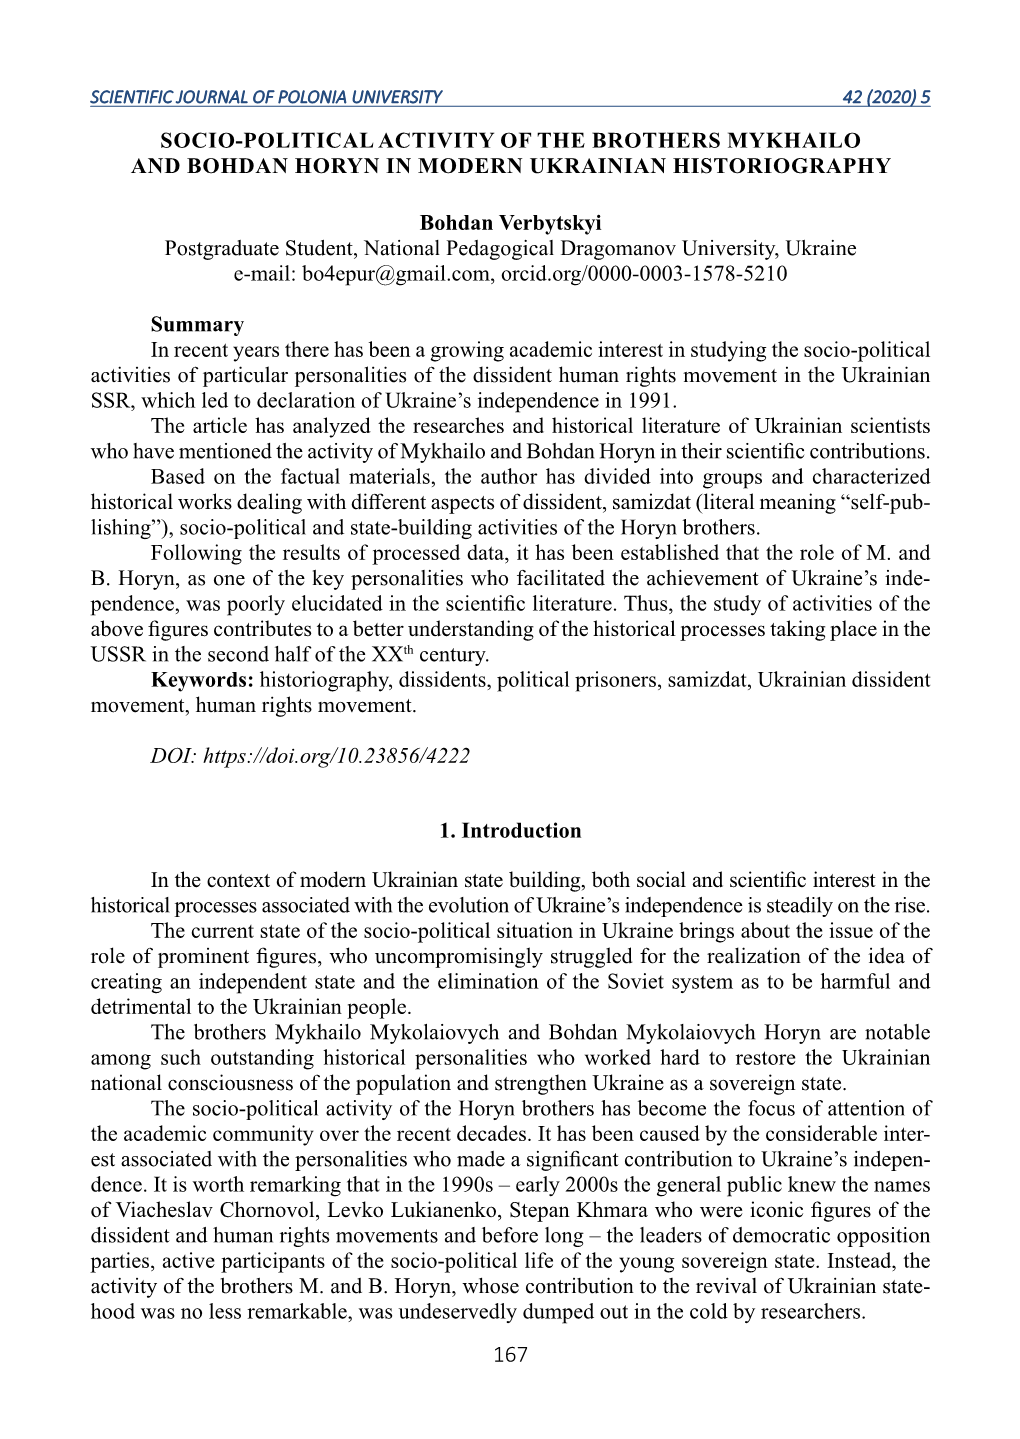 Socio-Political Activity of the Brothers Mykhailo and Bohdan Horyn in Modern Ukrainian Historiography